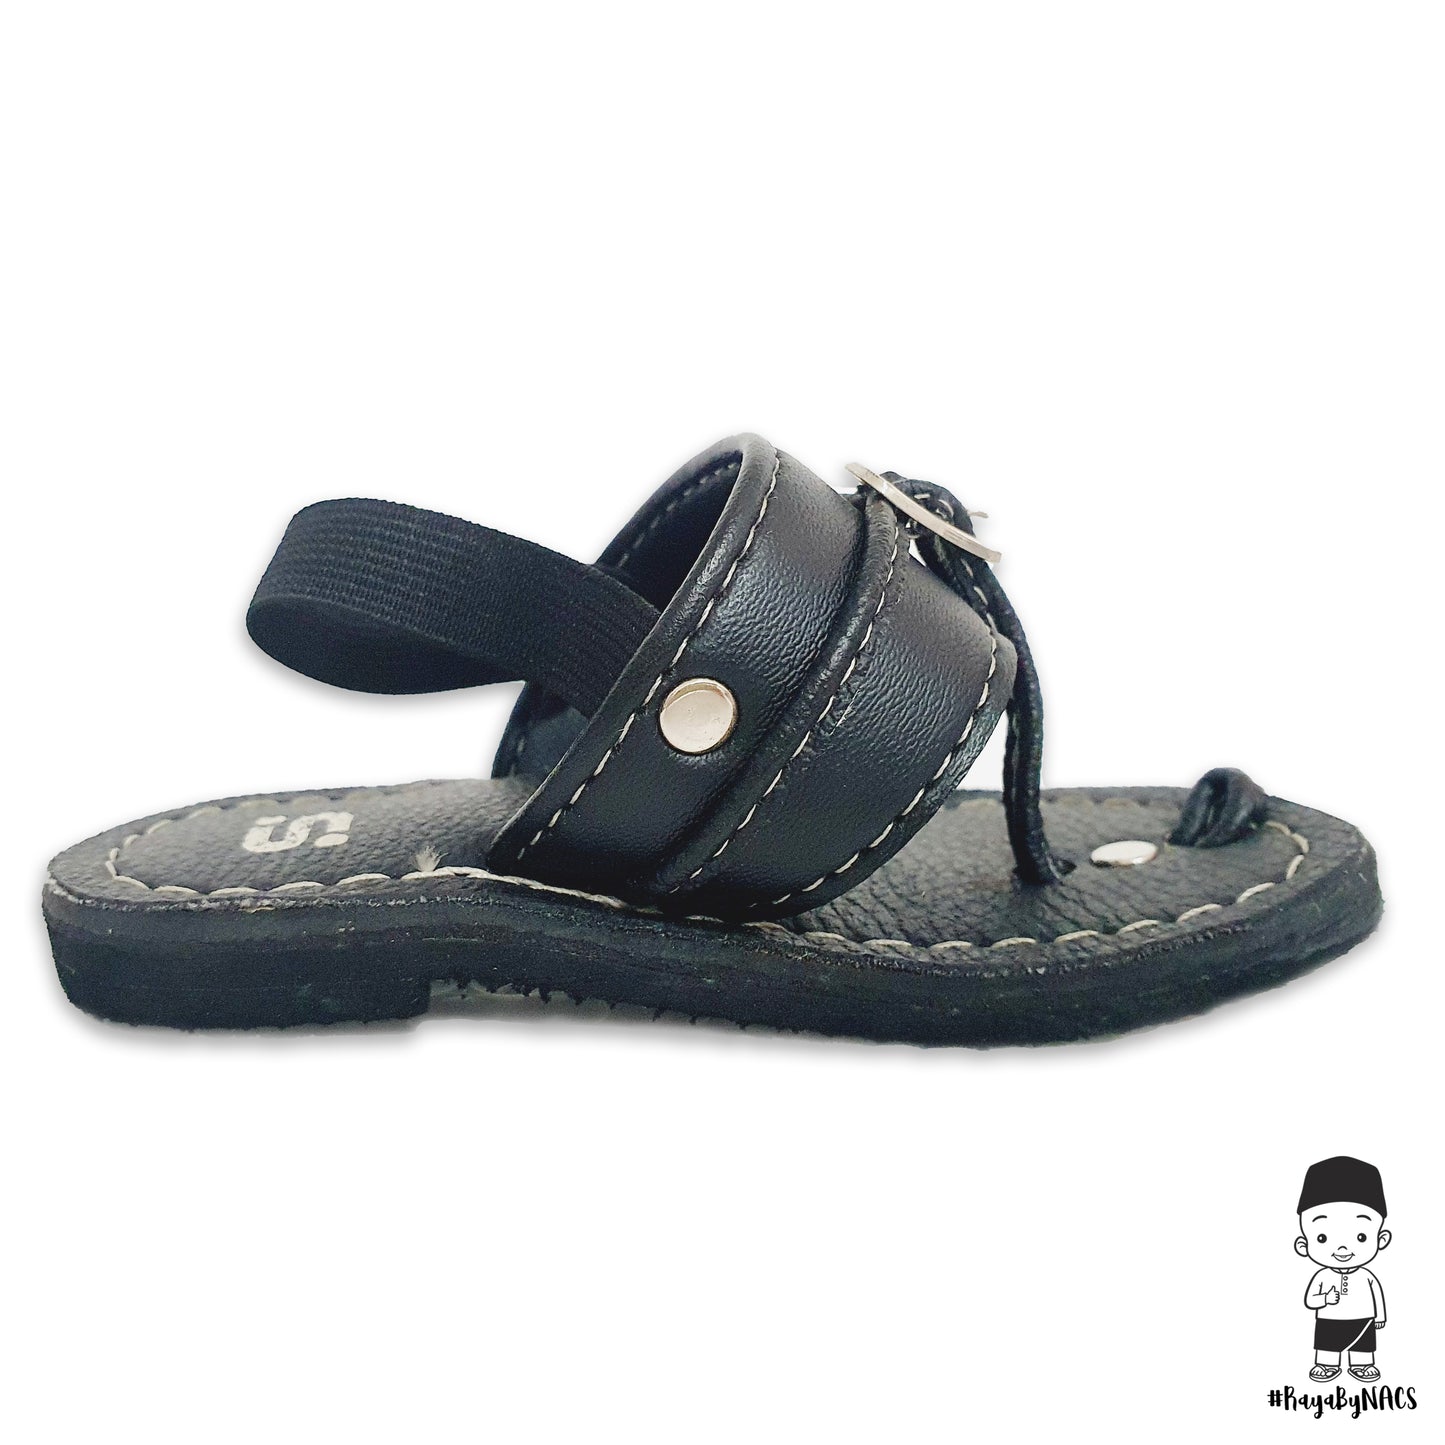 Kids Chapal Black Sole and Black Strap